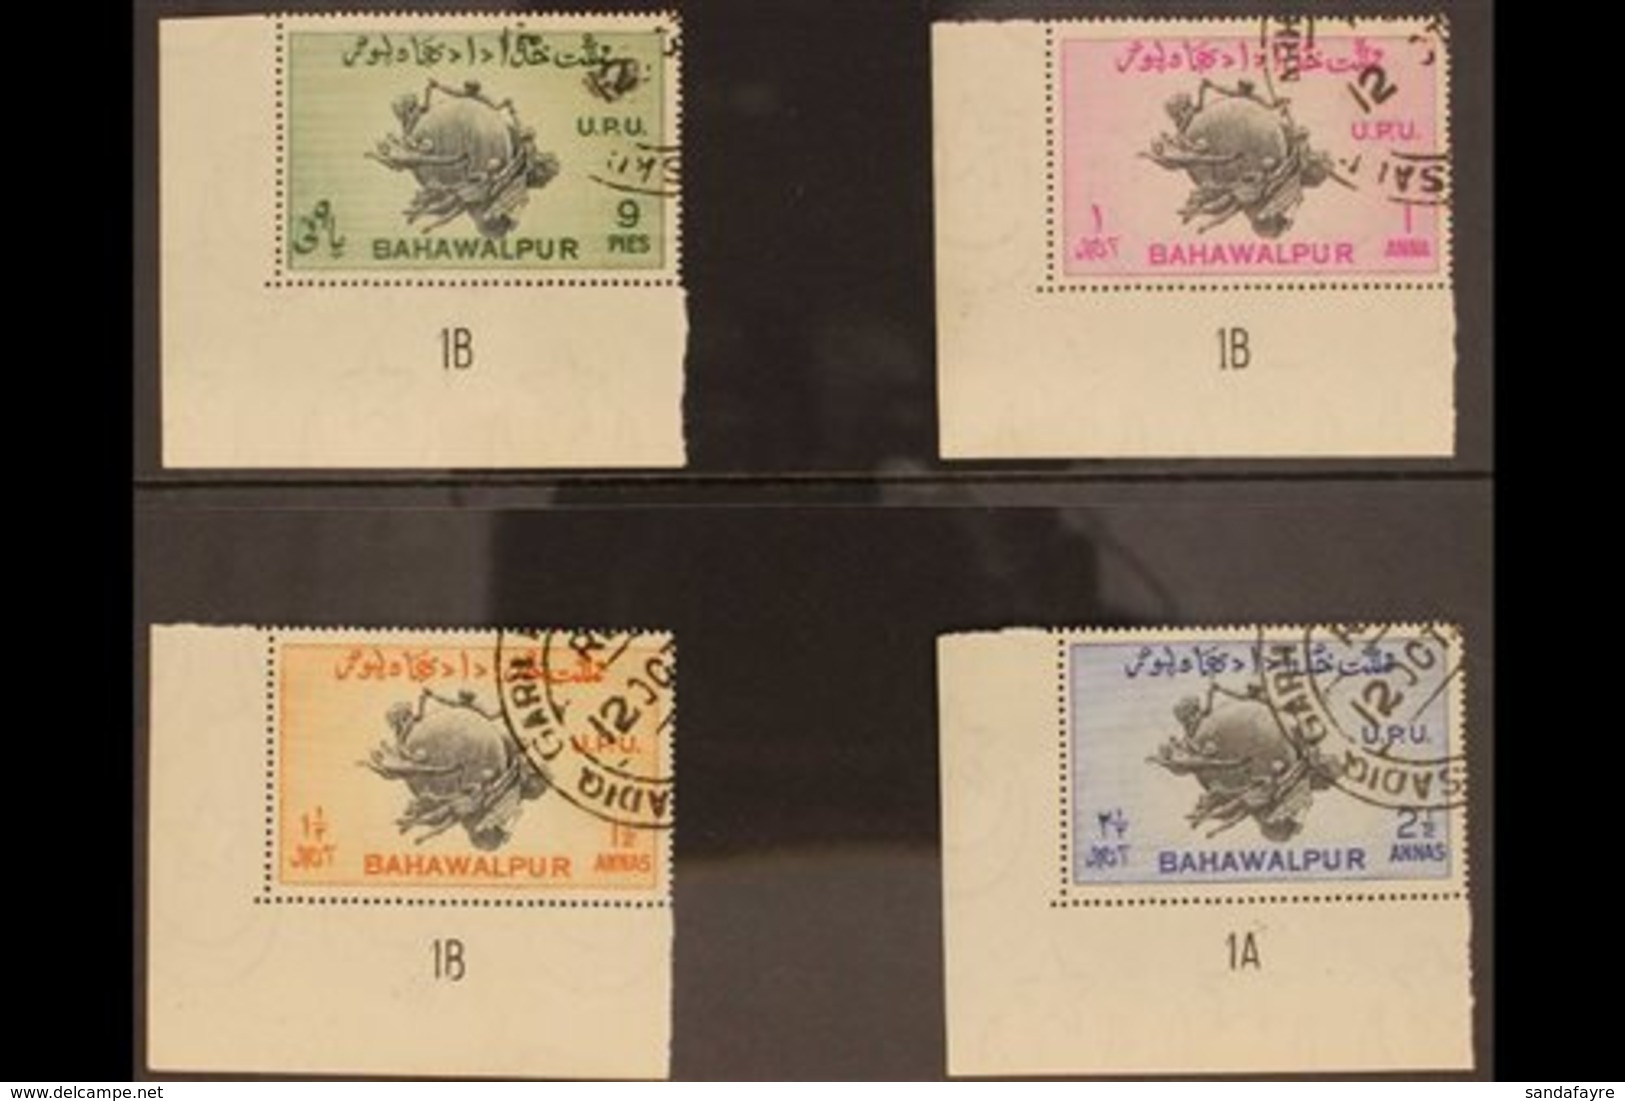 1949 UPU Corner Singles Plate Set, Perf 17½ X 17, SG 43a/46a, Very Fine Cds Used (4 Stamps) For More Images, Please Visi - Bahawalpur